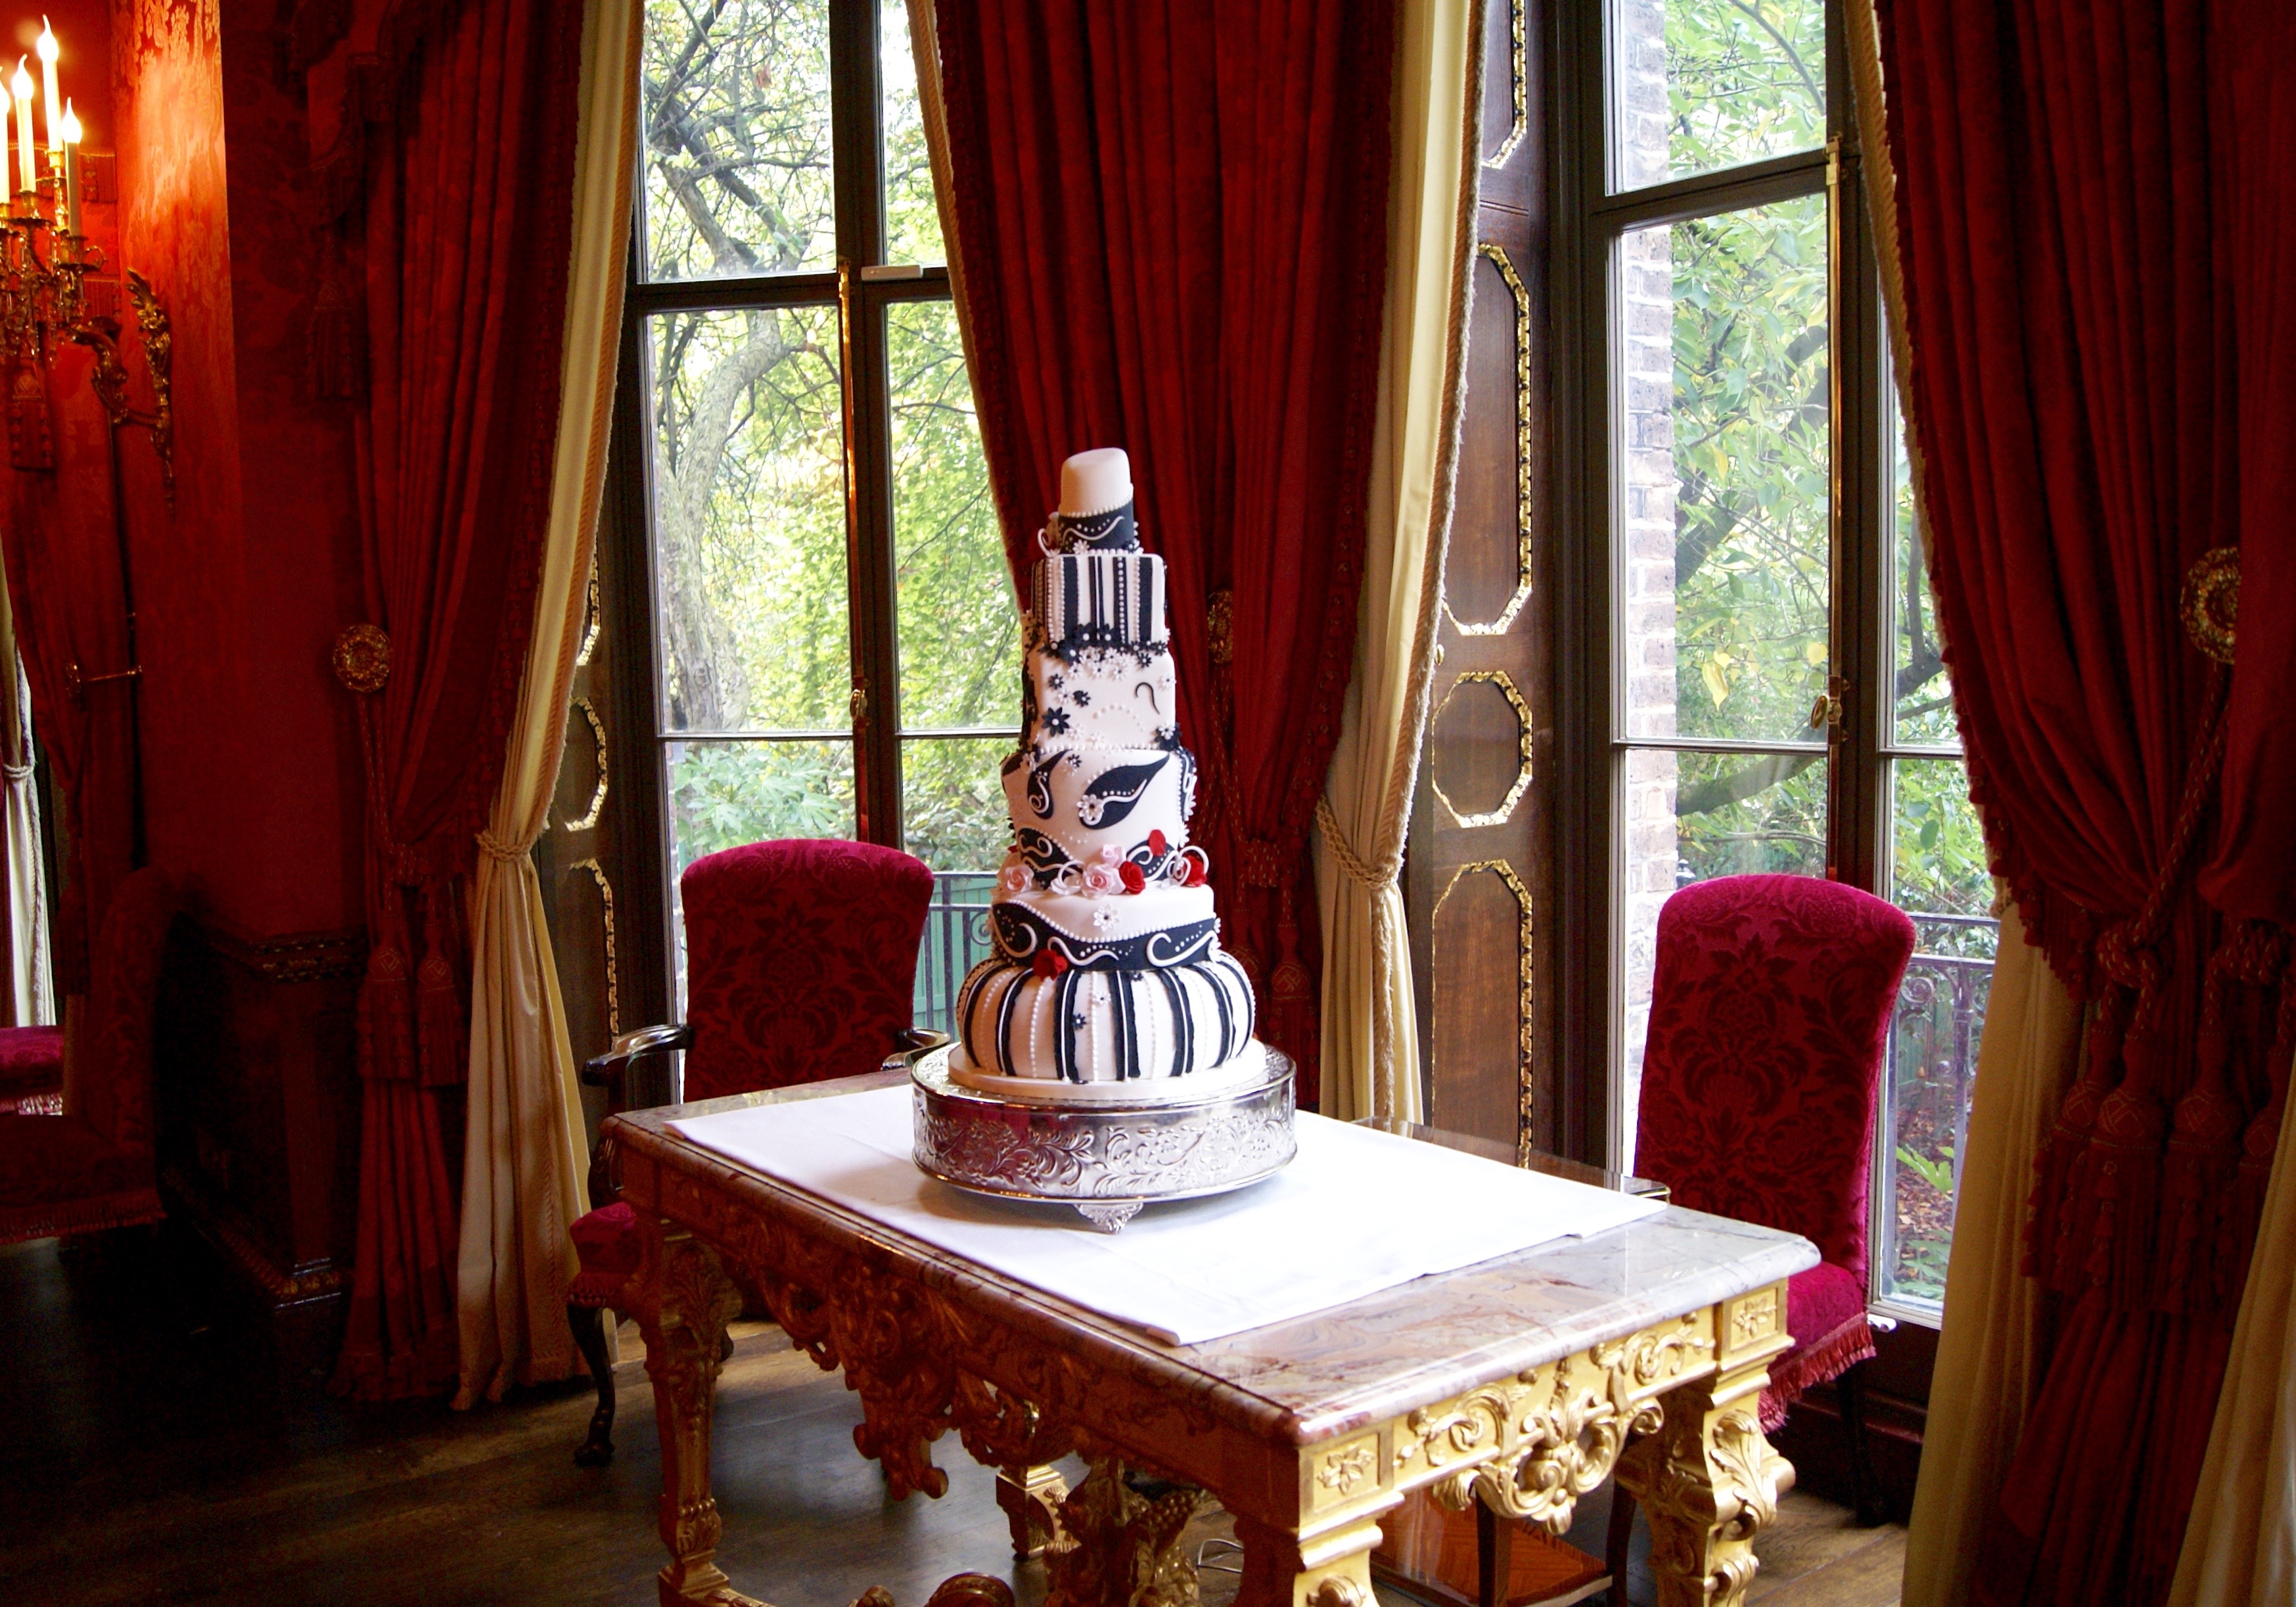 Mad Hatters Wedding Cake – The Ritz, London